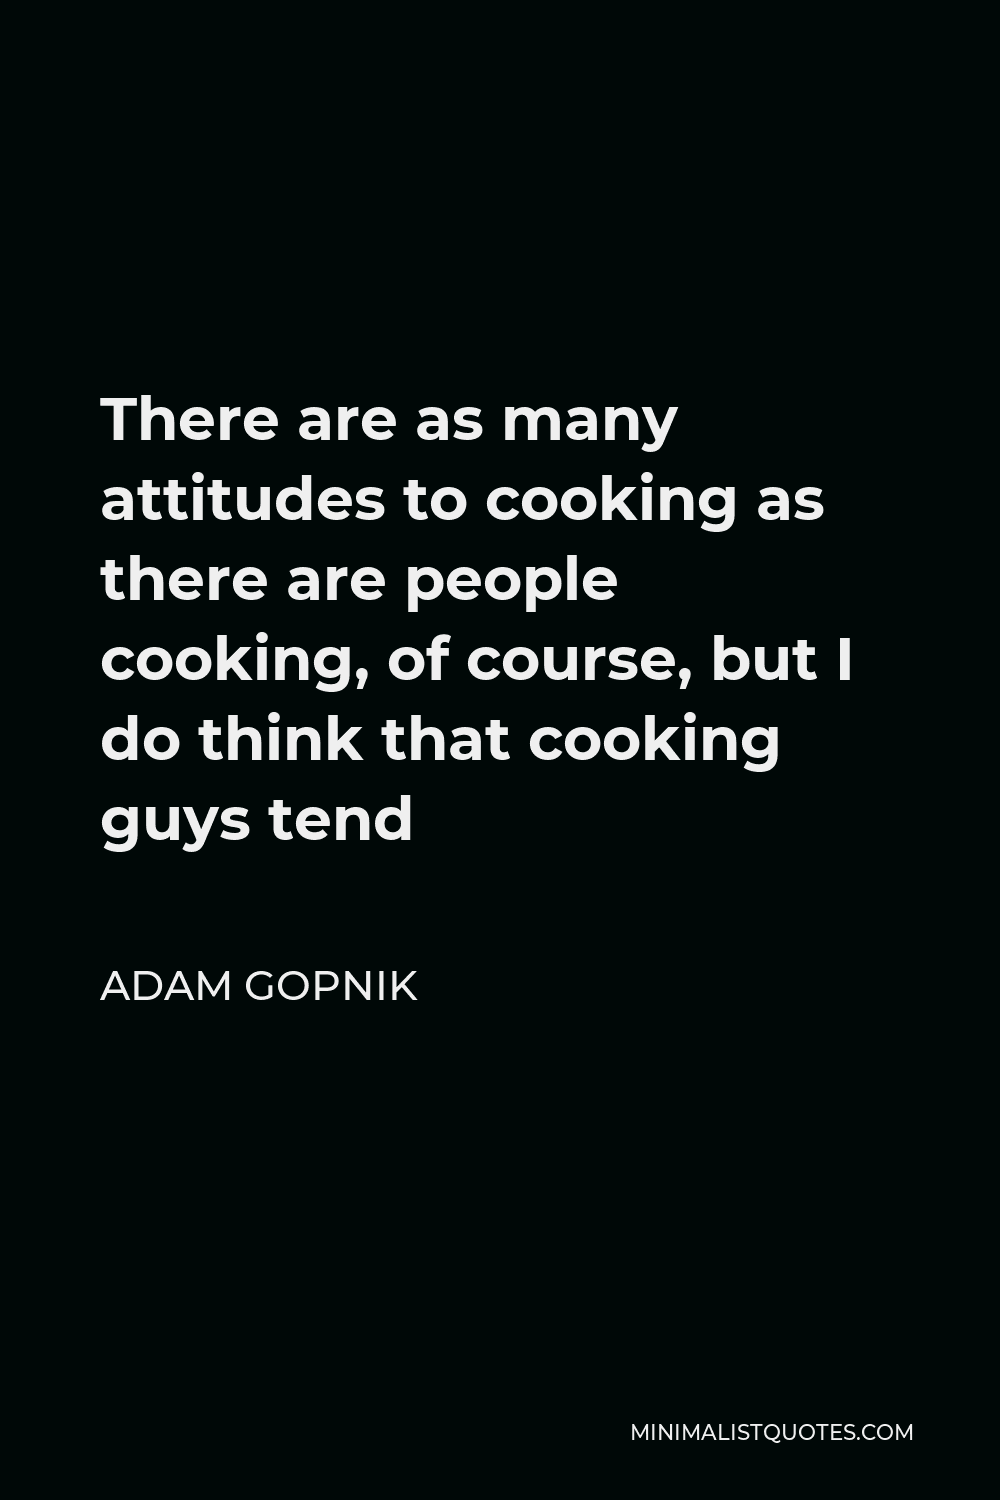 Adam Gopnik Quote - There are as many attitudes to cooking as there are people cooking, of course, but I do think that cooking guys tend